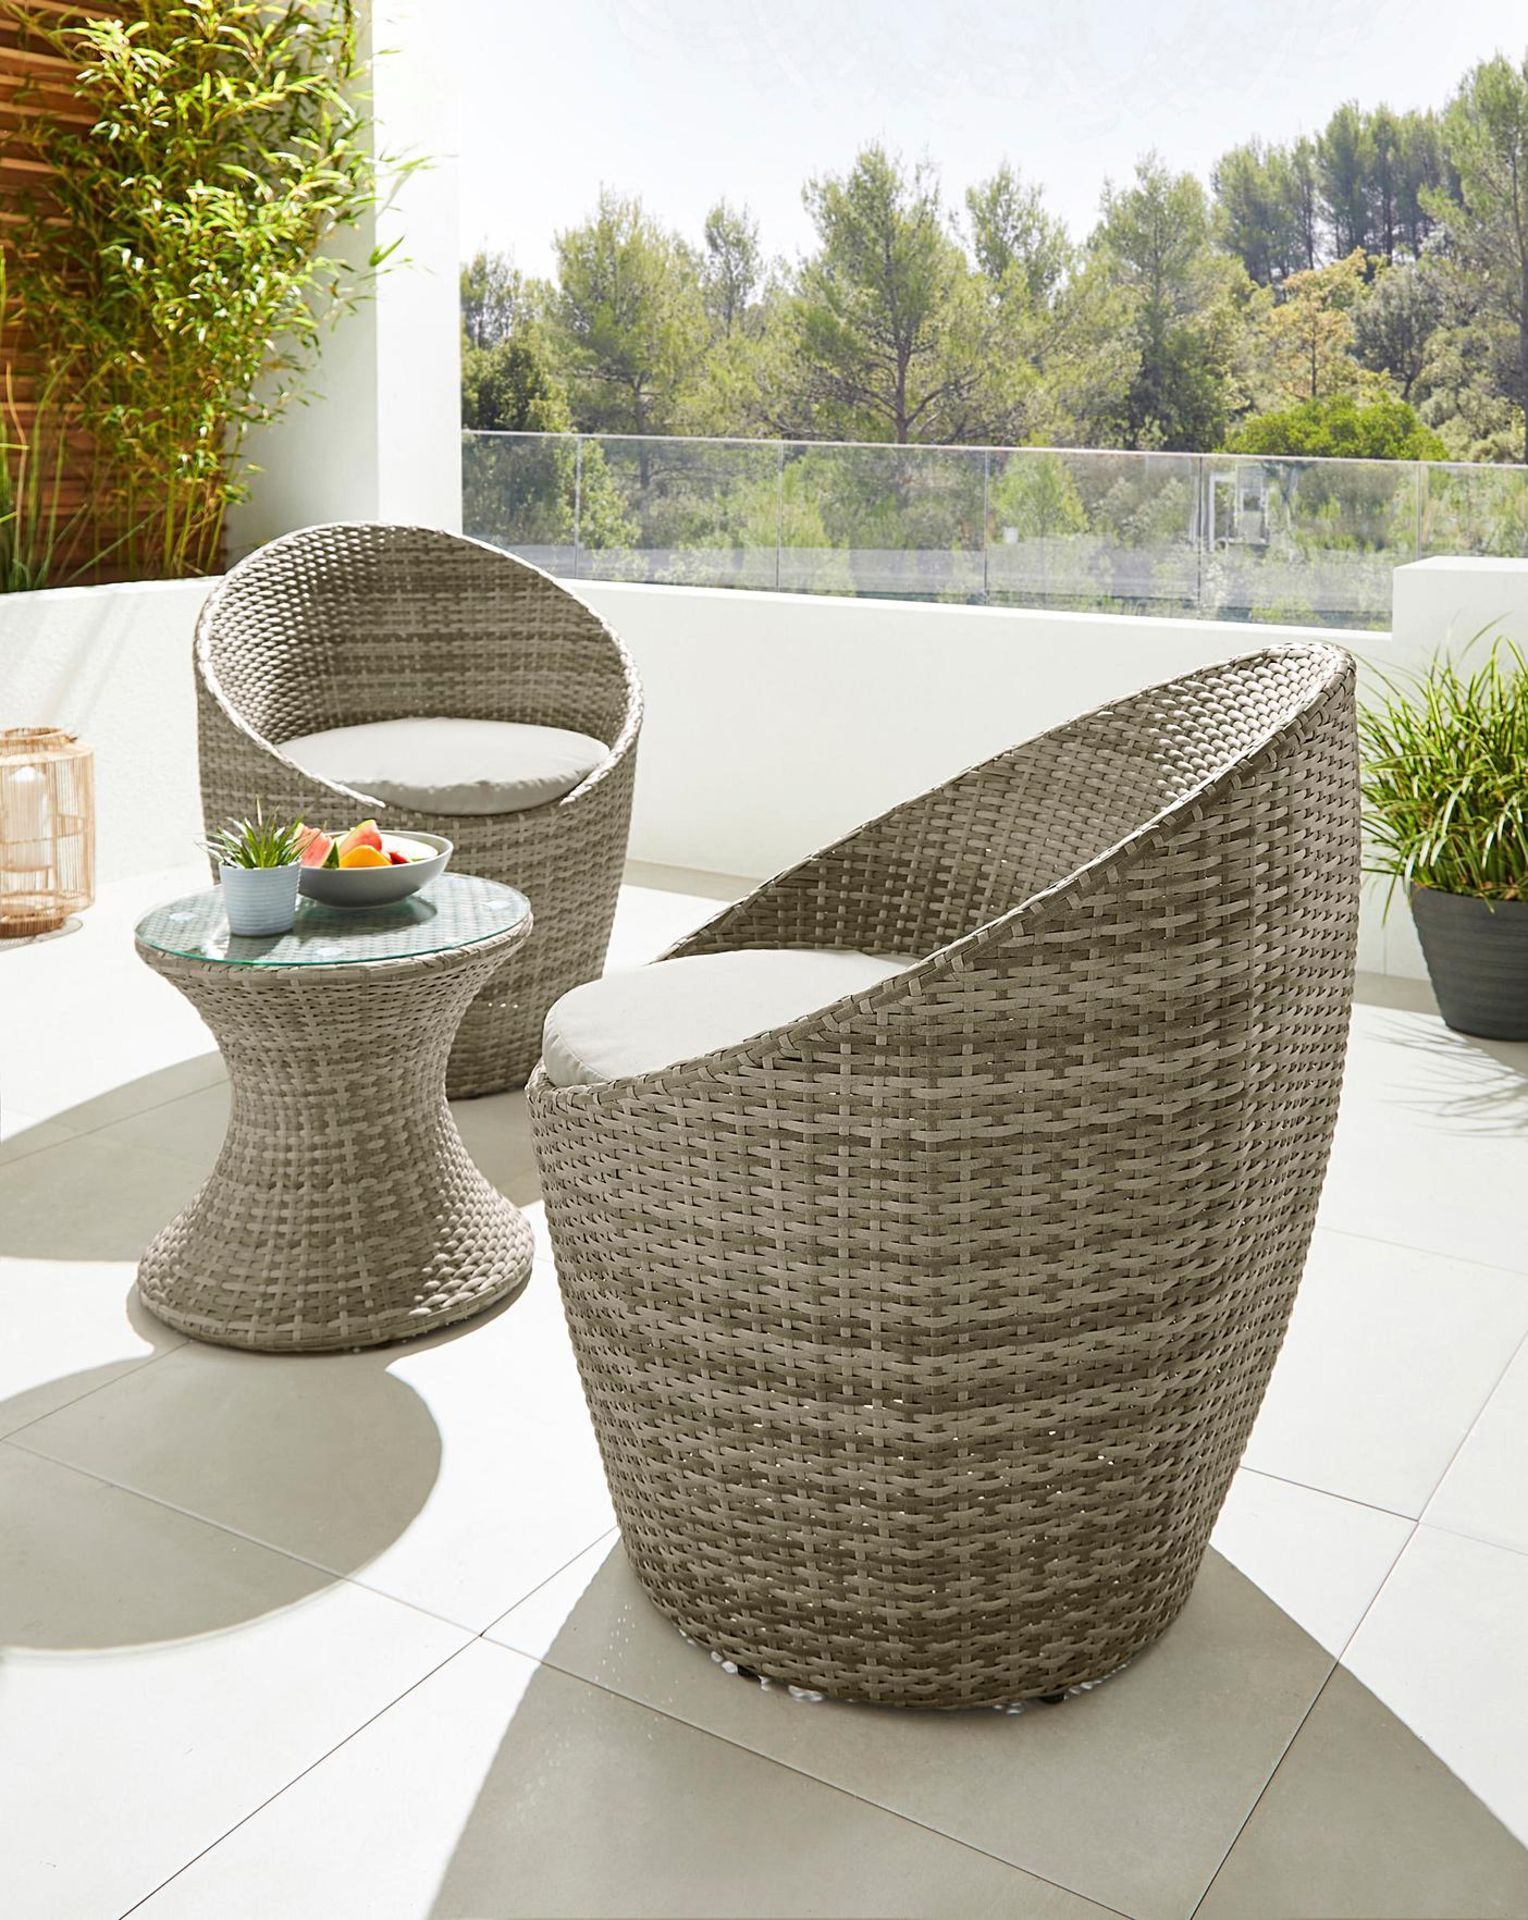 NEW & BOXED Luxury 3 Piece Pula Bistro Lounge Set. RRP £399.99. (ERC) This modern durable set is